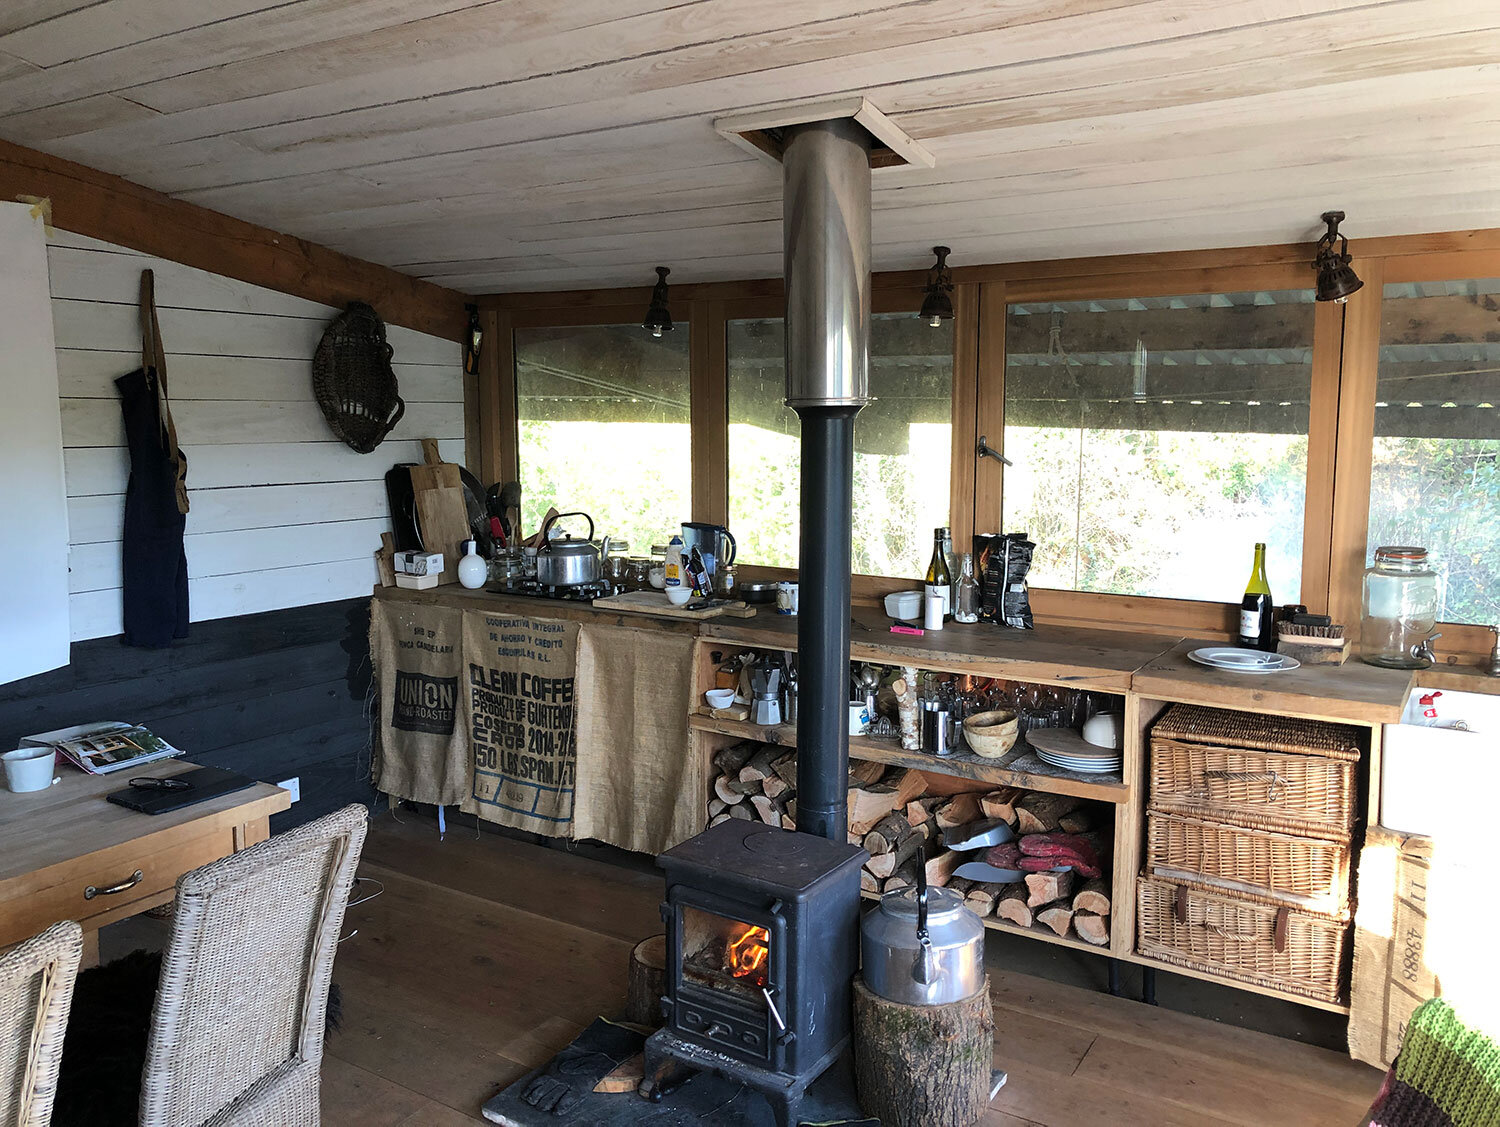 off-grid-rustic-cabin-interior-with-woodburner-and-handmade-kitchen